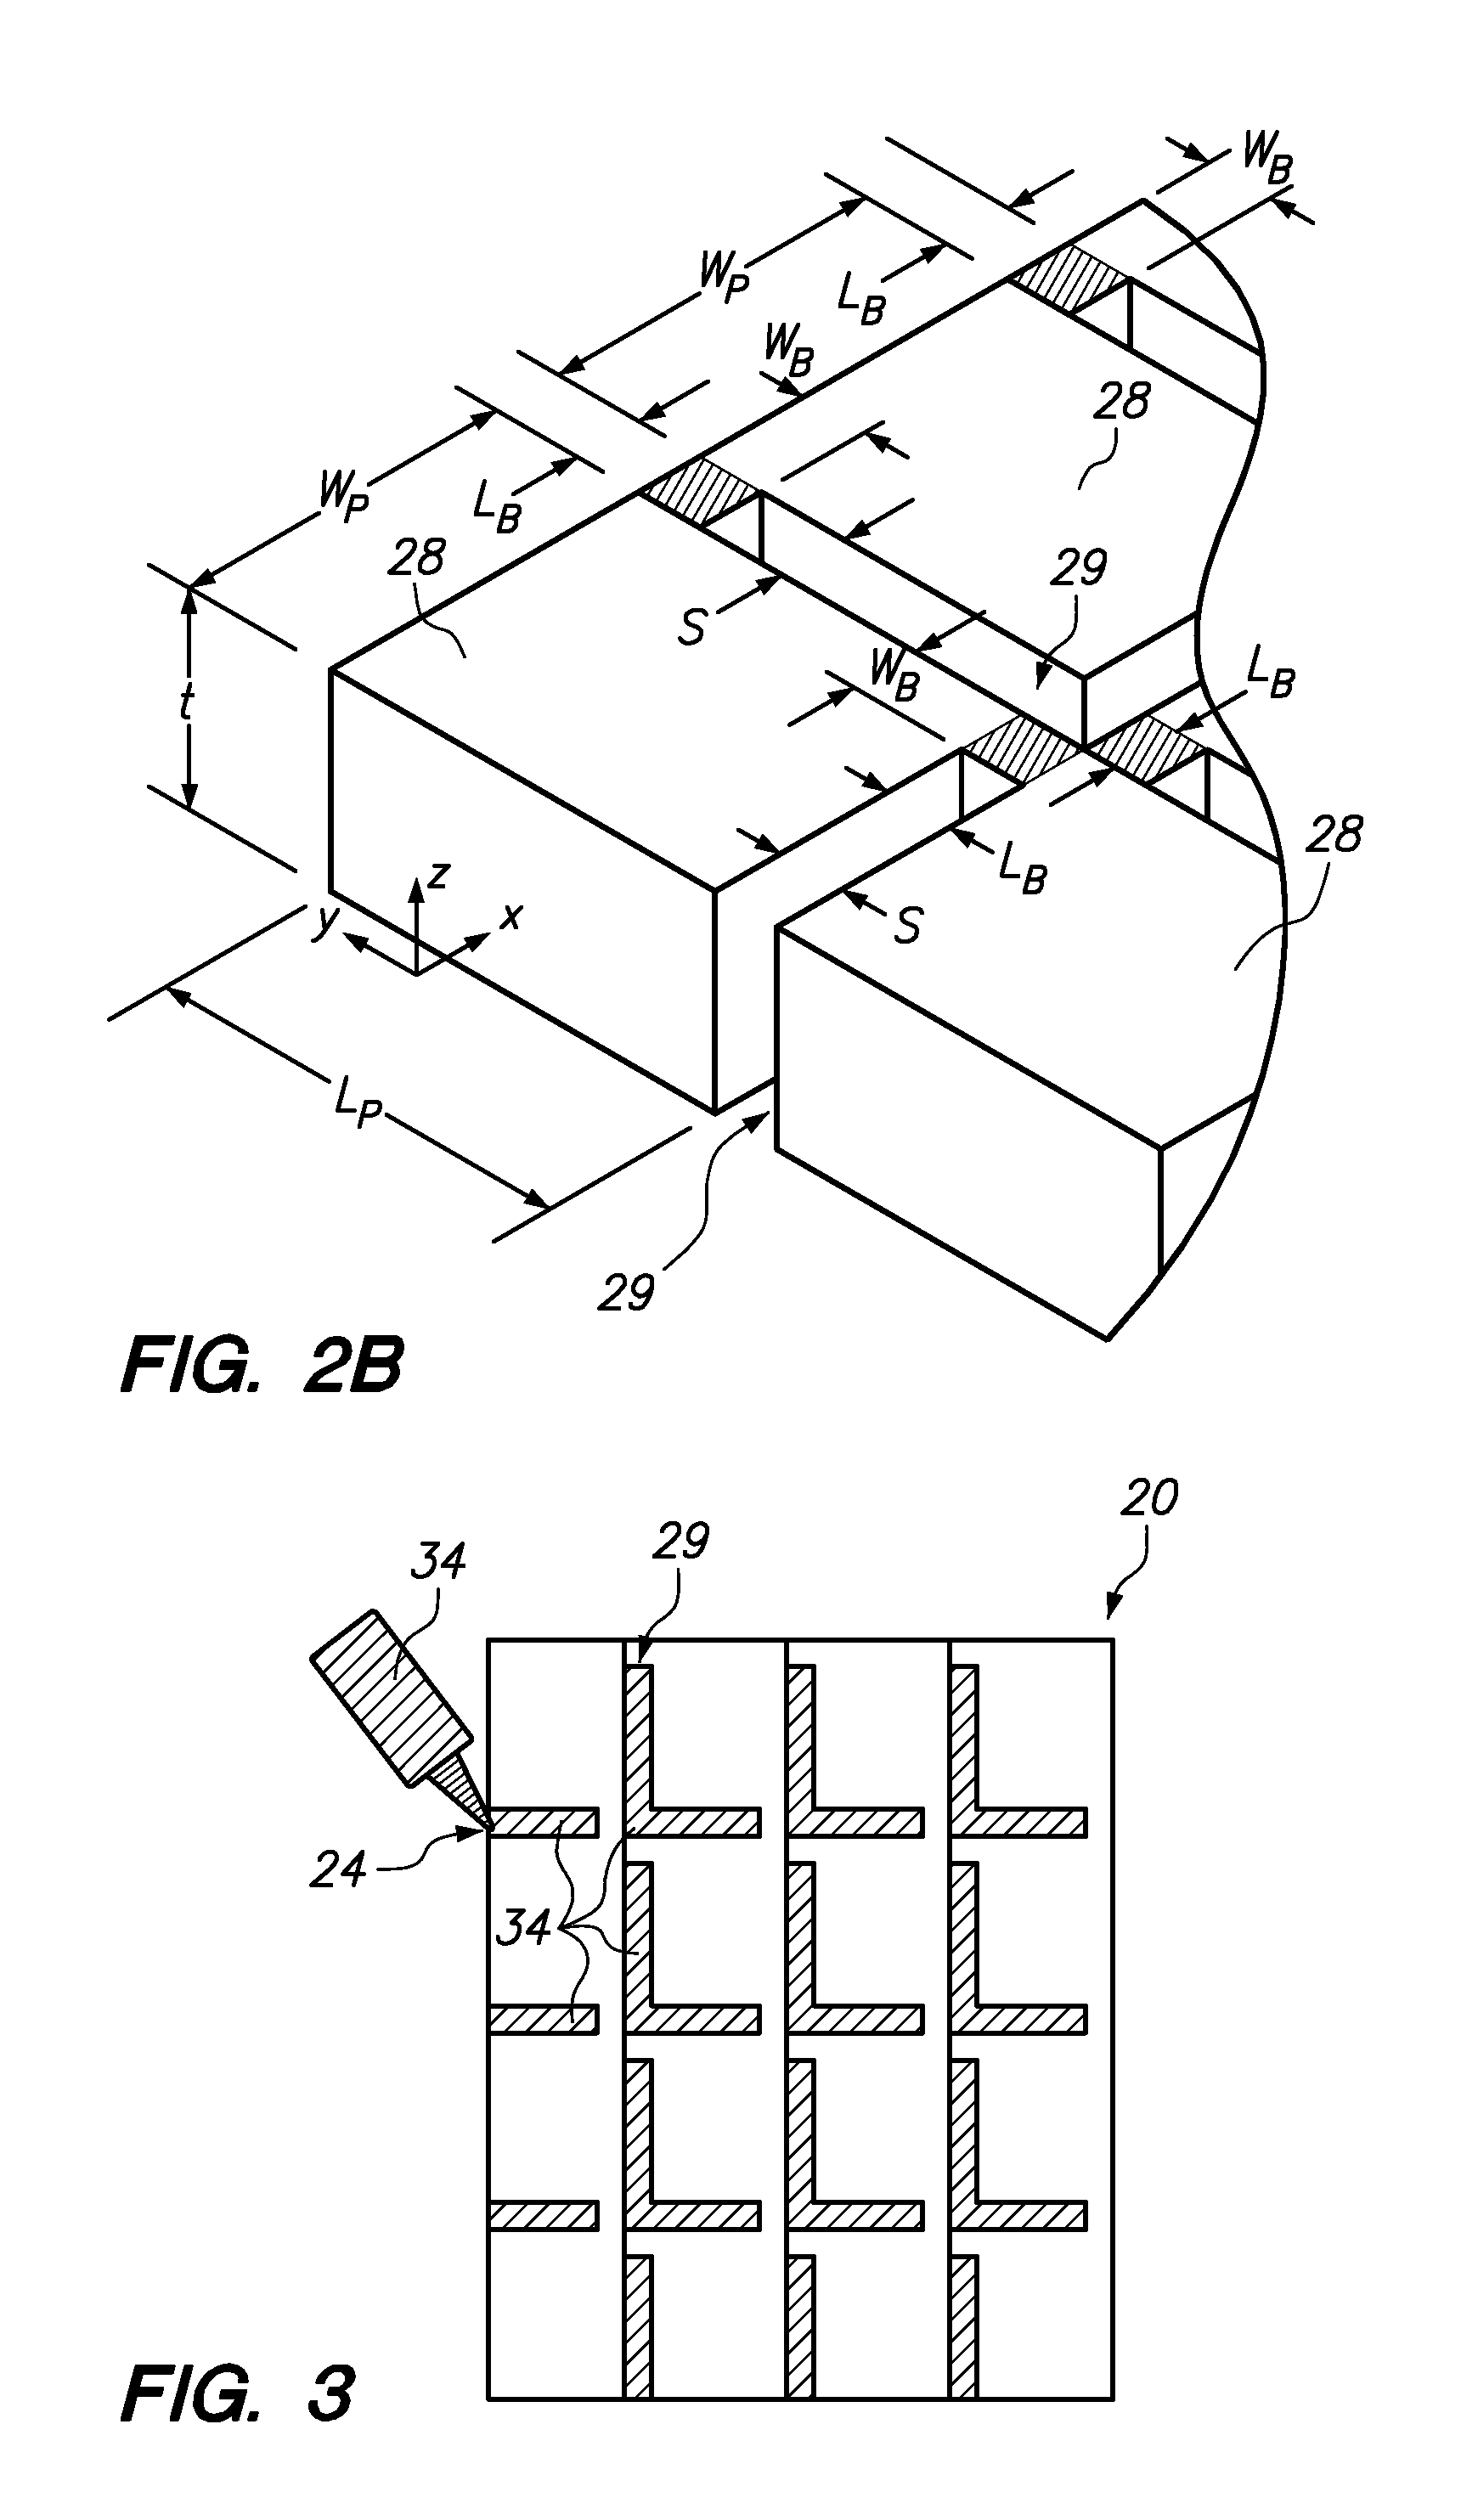 Heatsink with periodically patterned baseplate structure